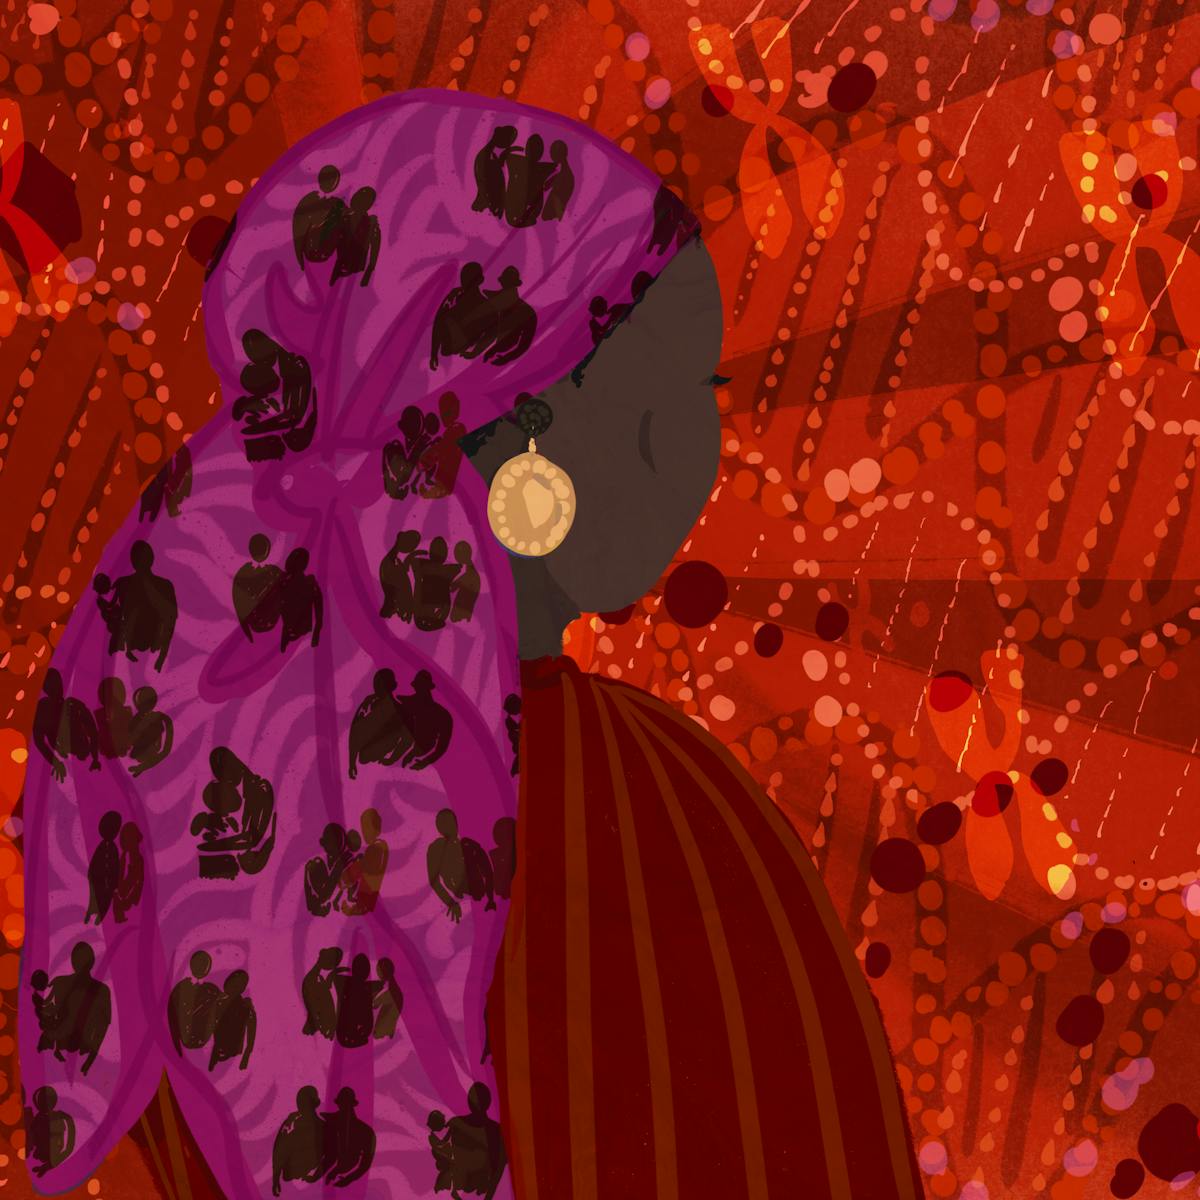 An illustration of a black woman, with a viewpoint looking over her right shoulder. She is wearing a head scarf depicting family groups and in the background are representations of DNA strands and chromosomes.